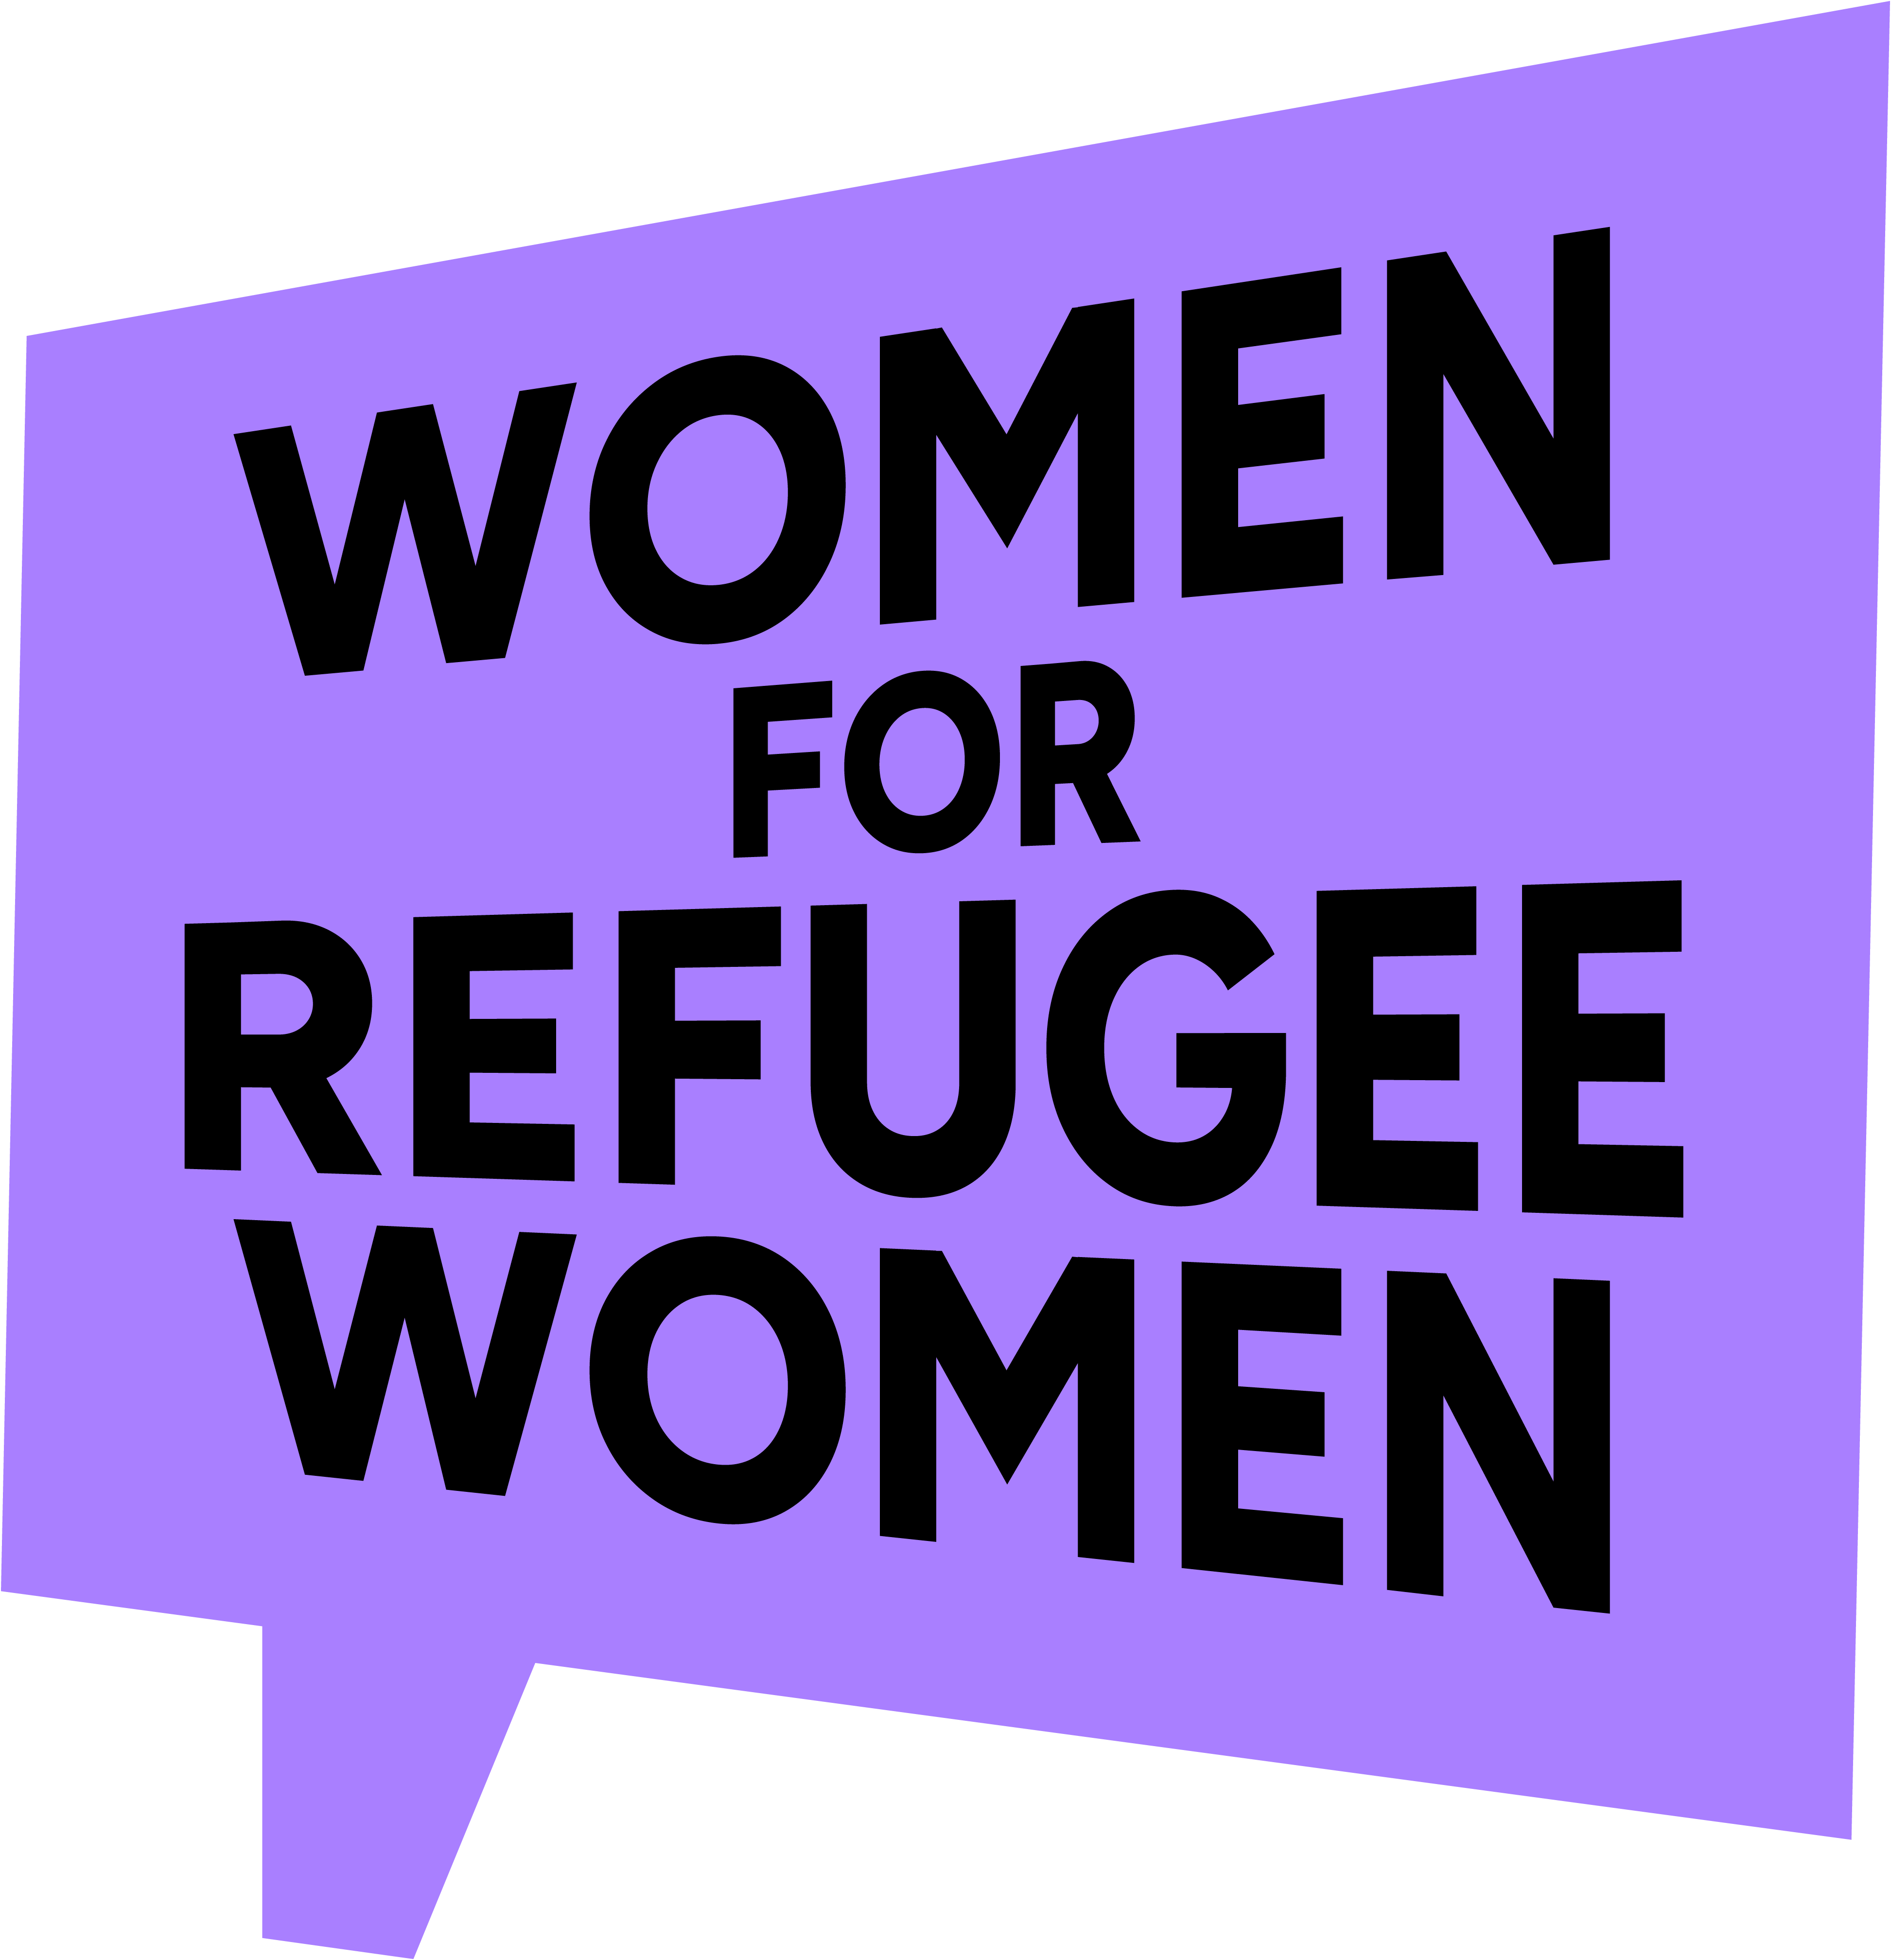 Women for Refugee Women logo. £2 from the sale of this item goes to support Women for Refugee Women. 